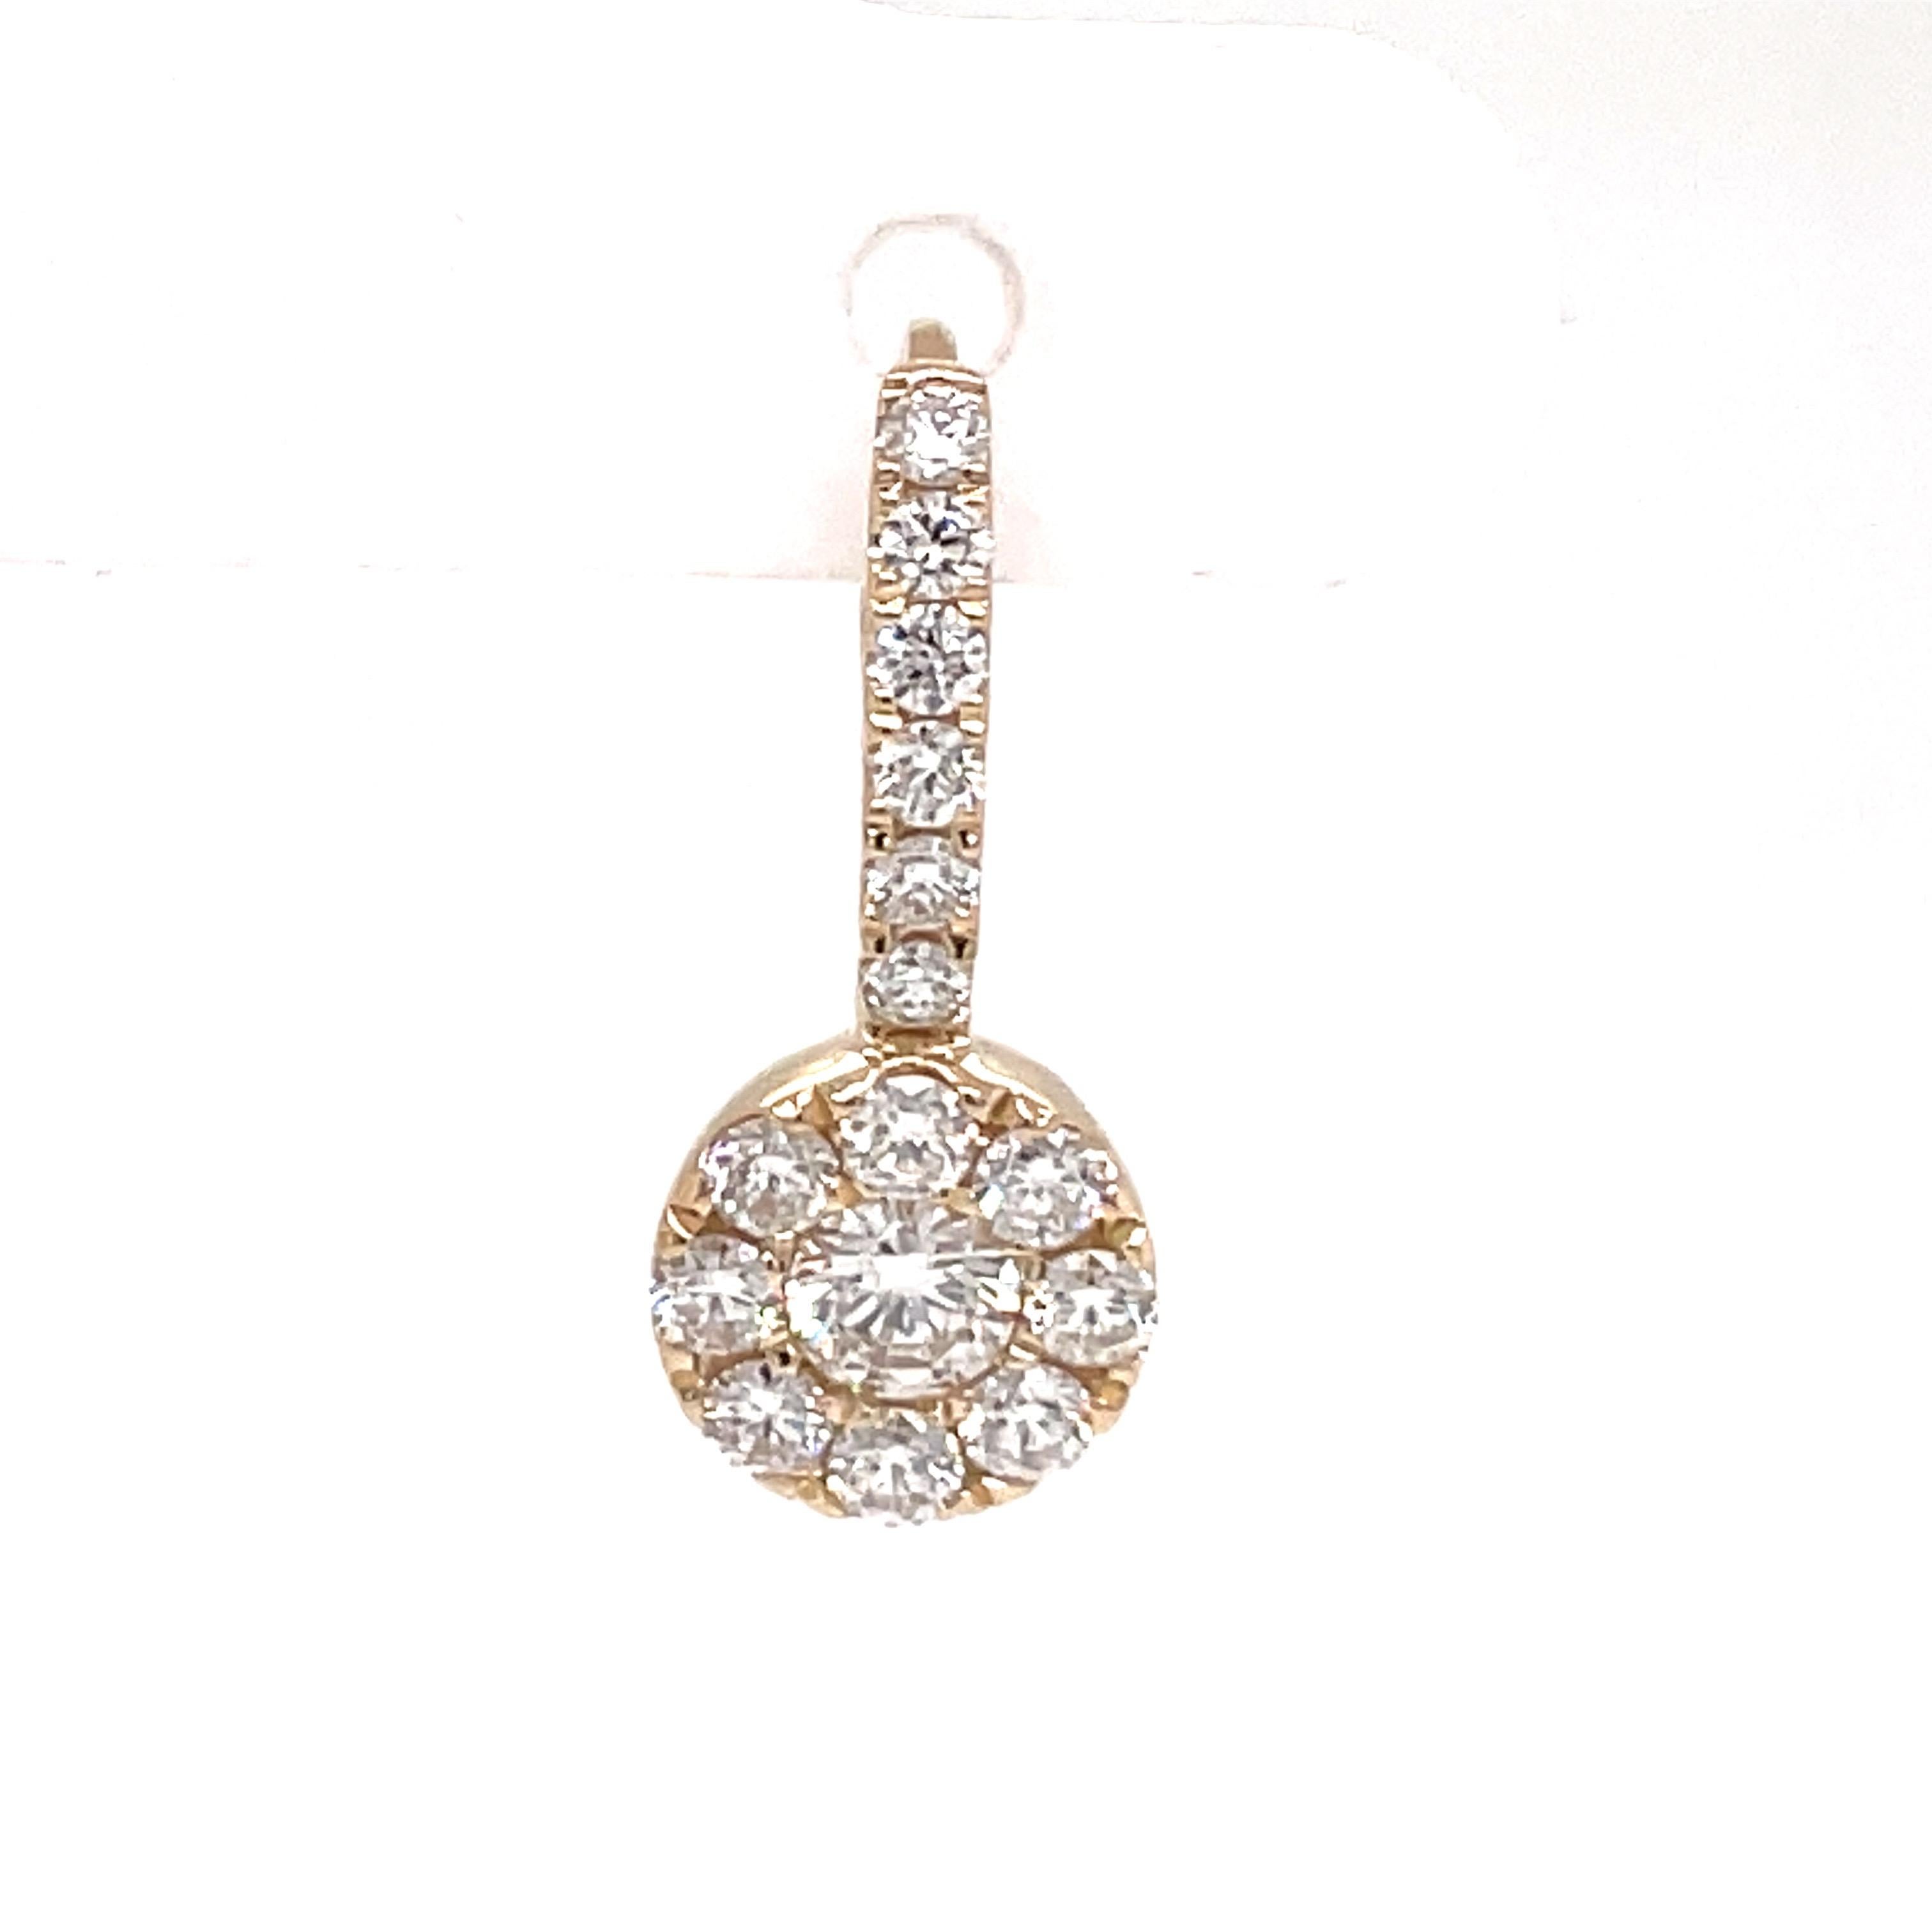 14 Karat Yellow gold drop earrings featuring two center diamonds weighing 0.26 carats flanked with 28 round brilliants weighing 0.56 carats.
Color G-H
Clarity SI

Available in white gold. 